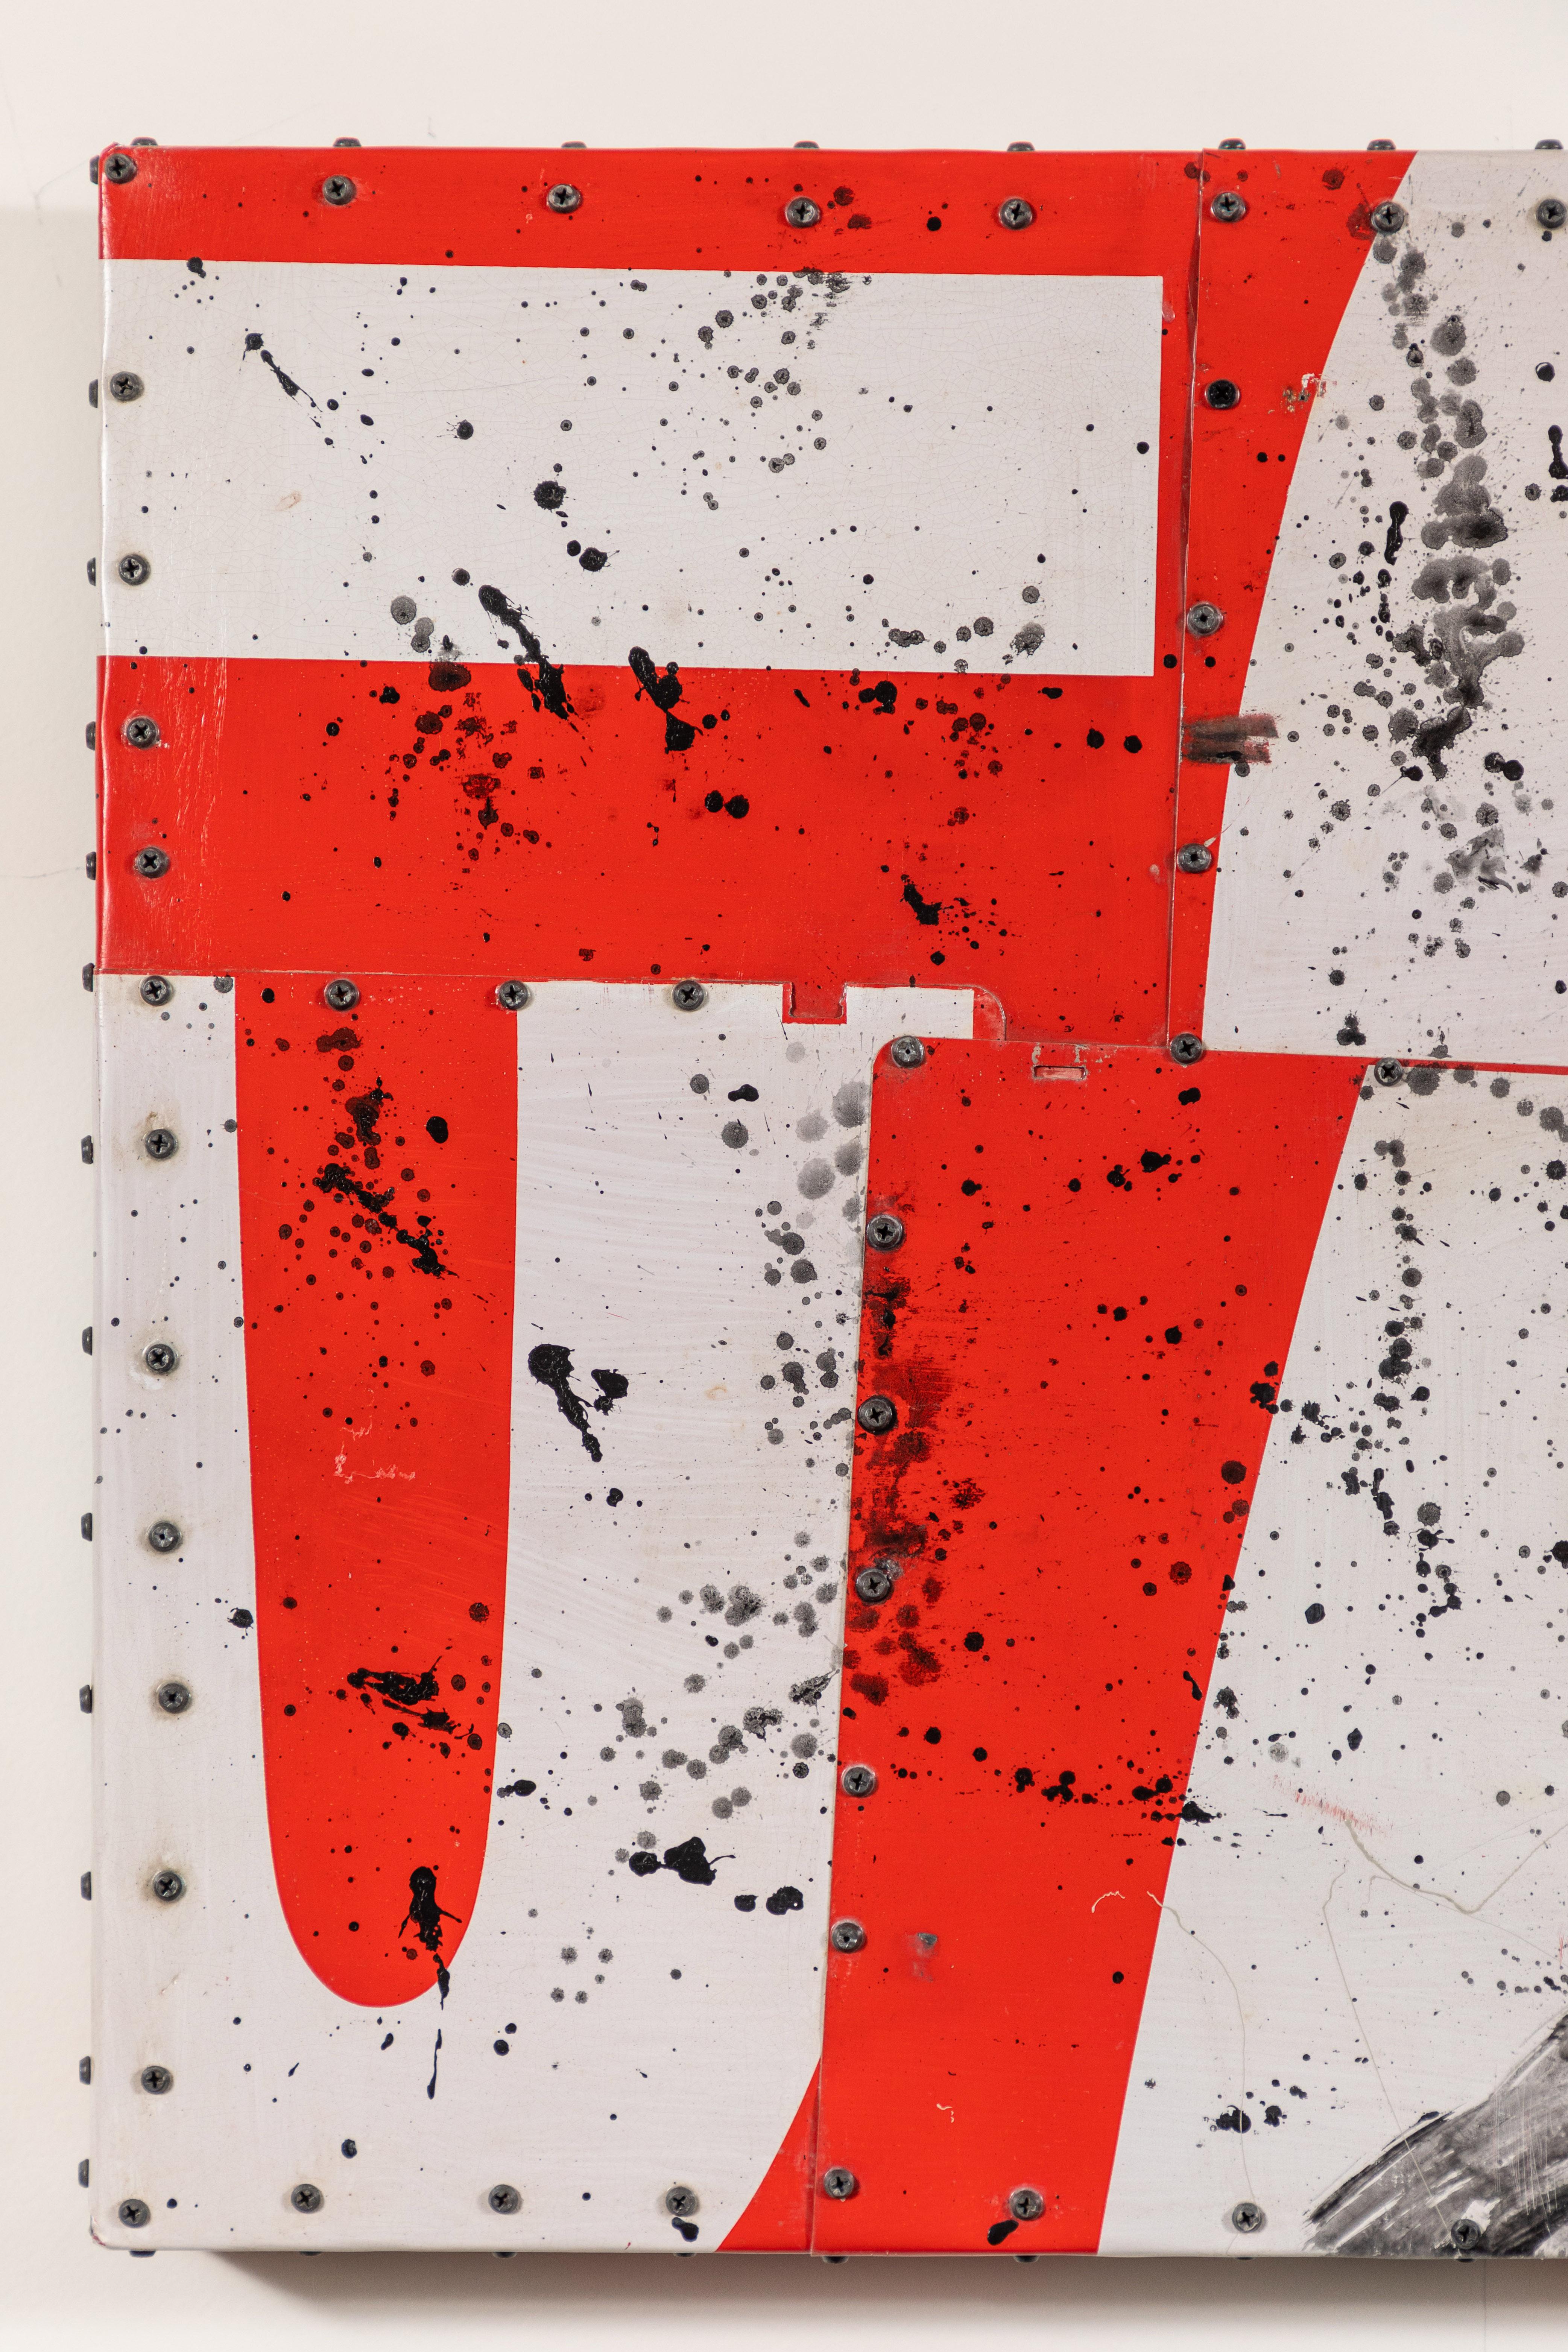 Original, highly decorative, industrial style abstract artwork done with pieced metal over wood in colors of red, white and black, 2000s. Unsigned.